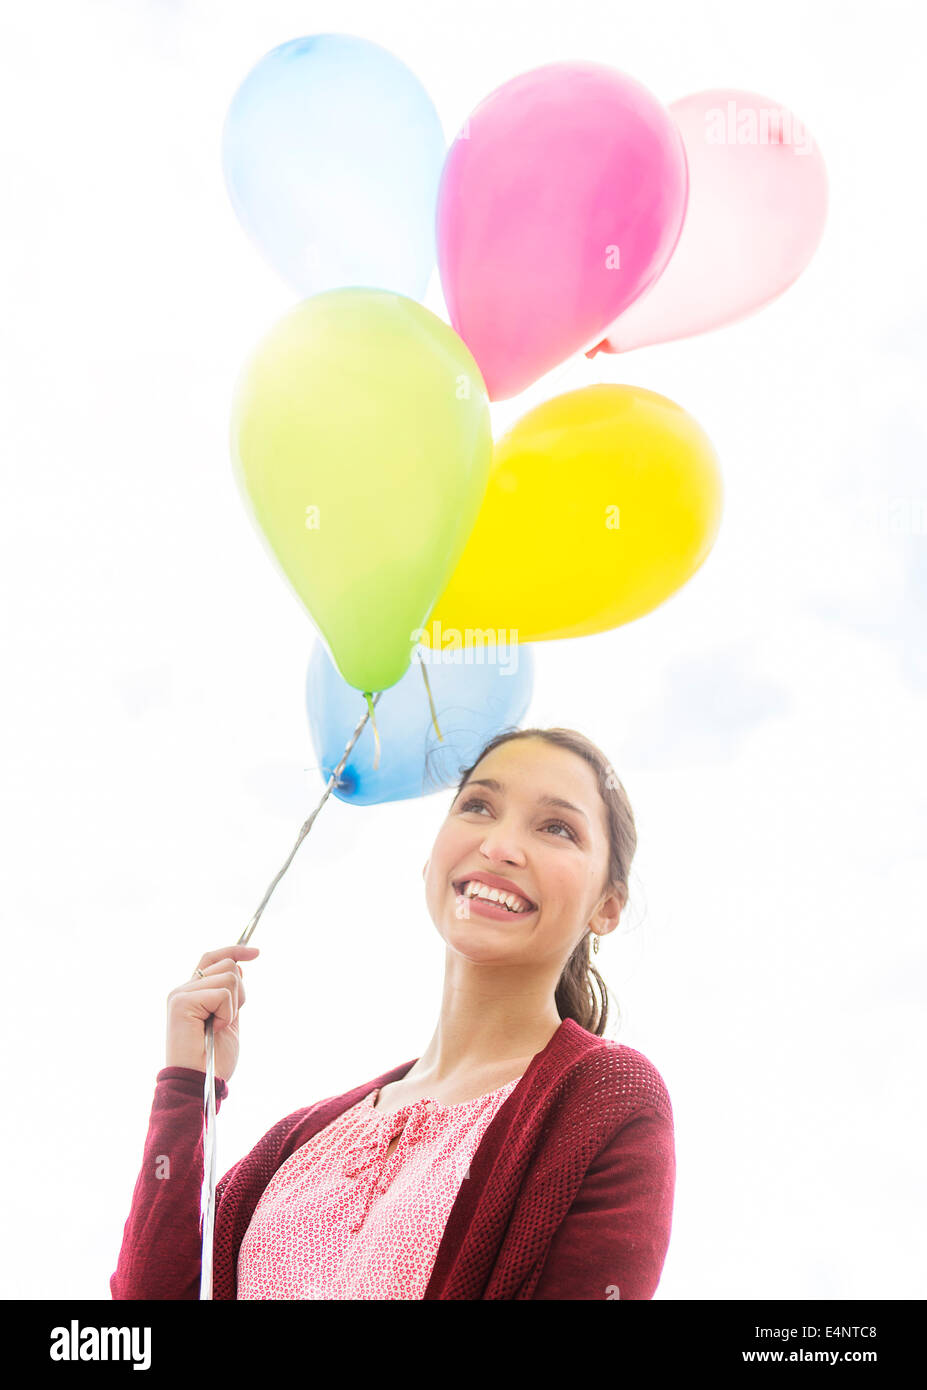 Young woman with colorful balloons Stock Photo